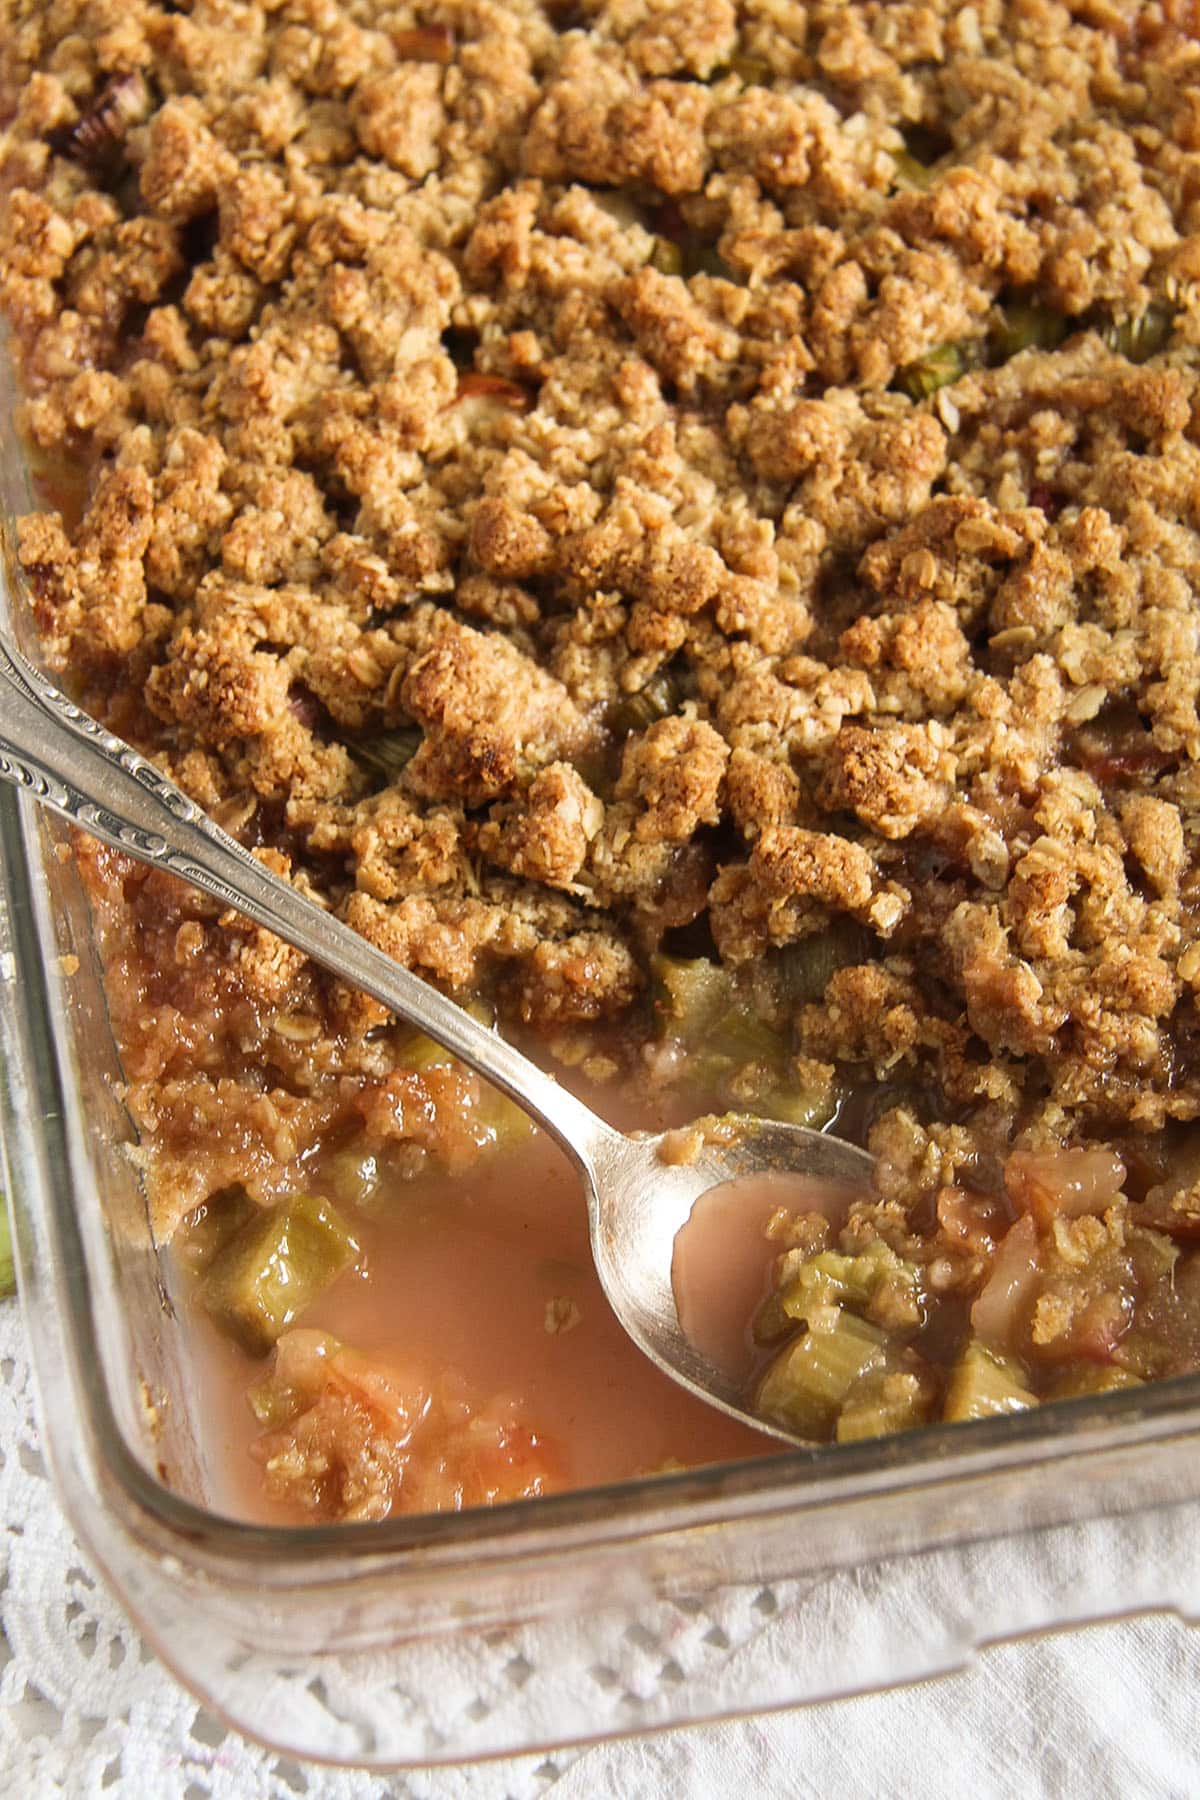 baking dish full of apple crisp with rhubarb with a spoon in it.